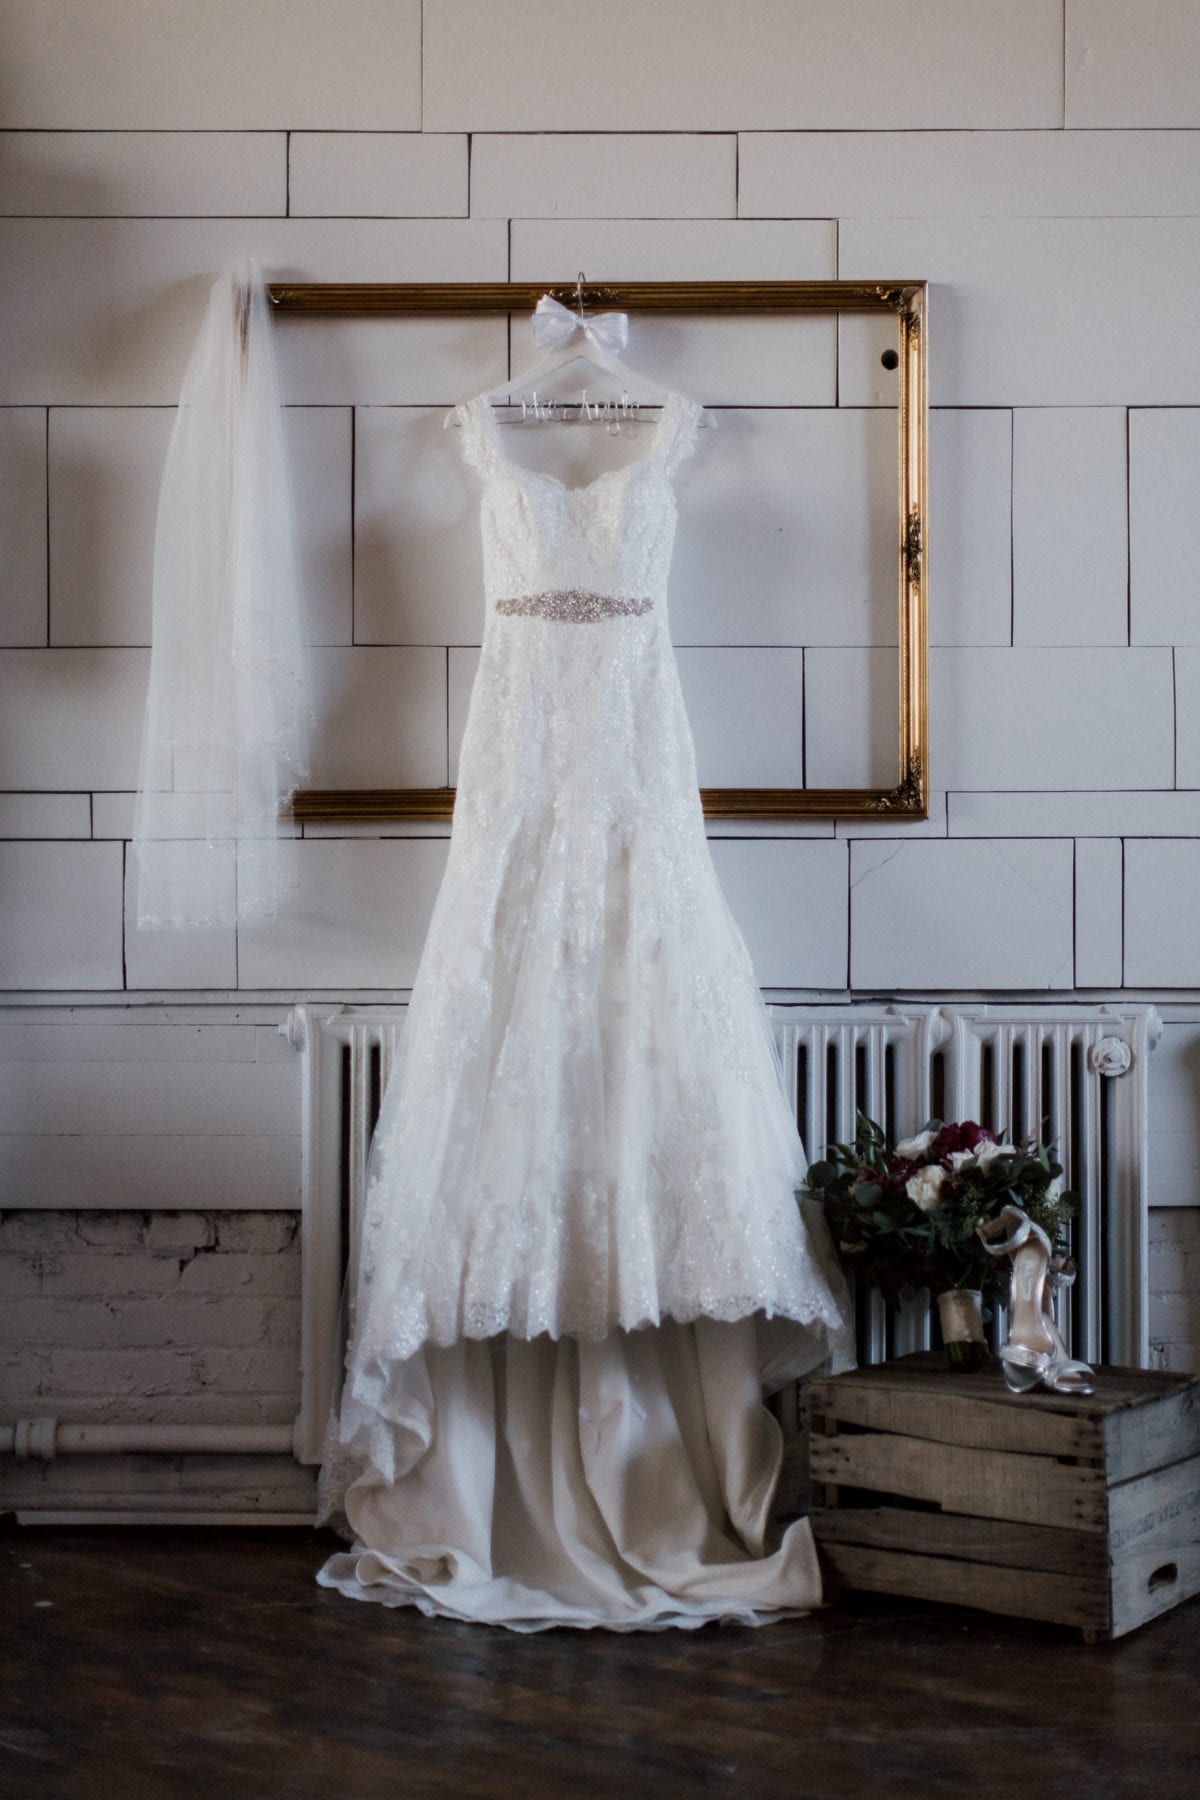 Stunning Wedding Dresses from Louise Christine Bridal Boutique & Atelier - Carrs Photography